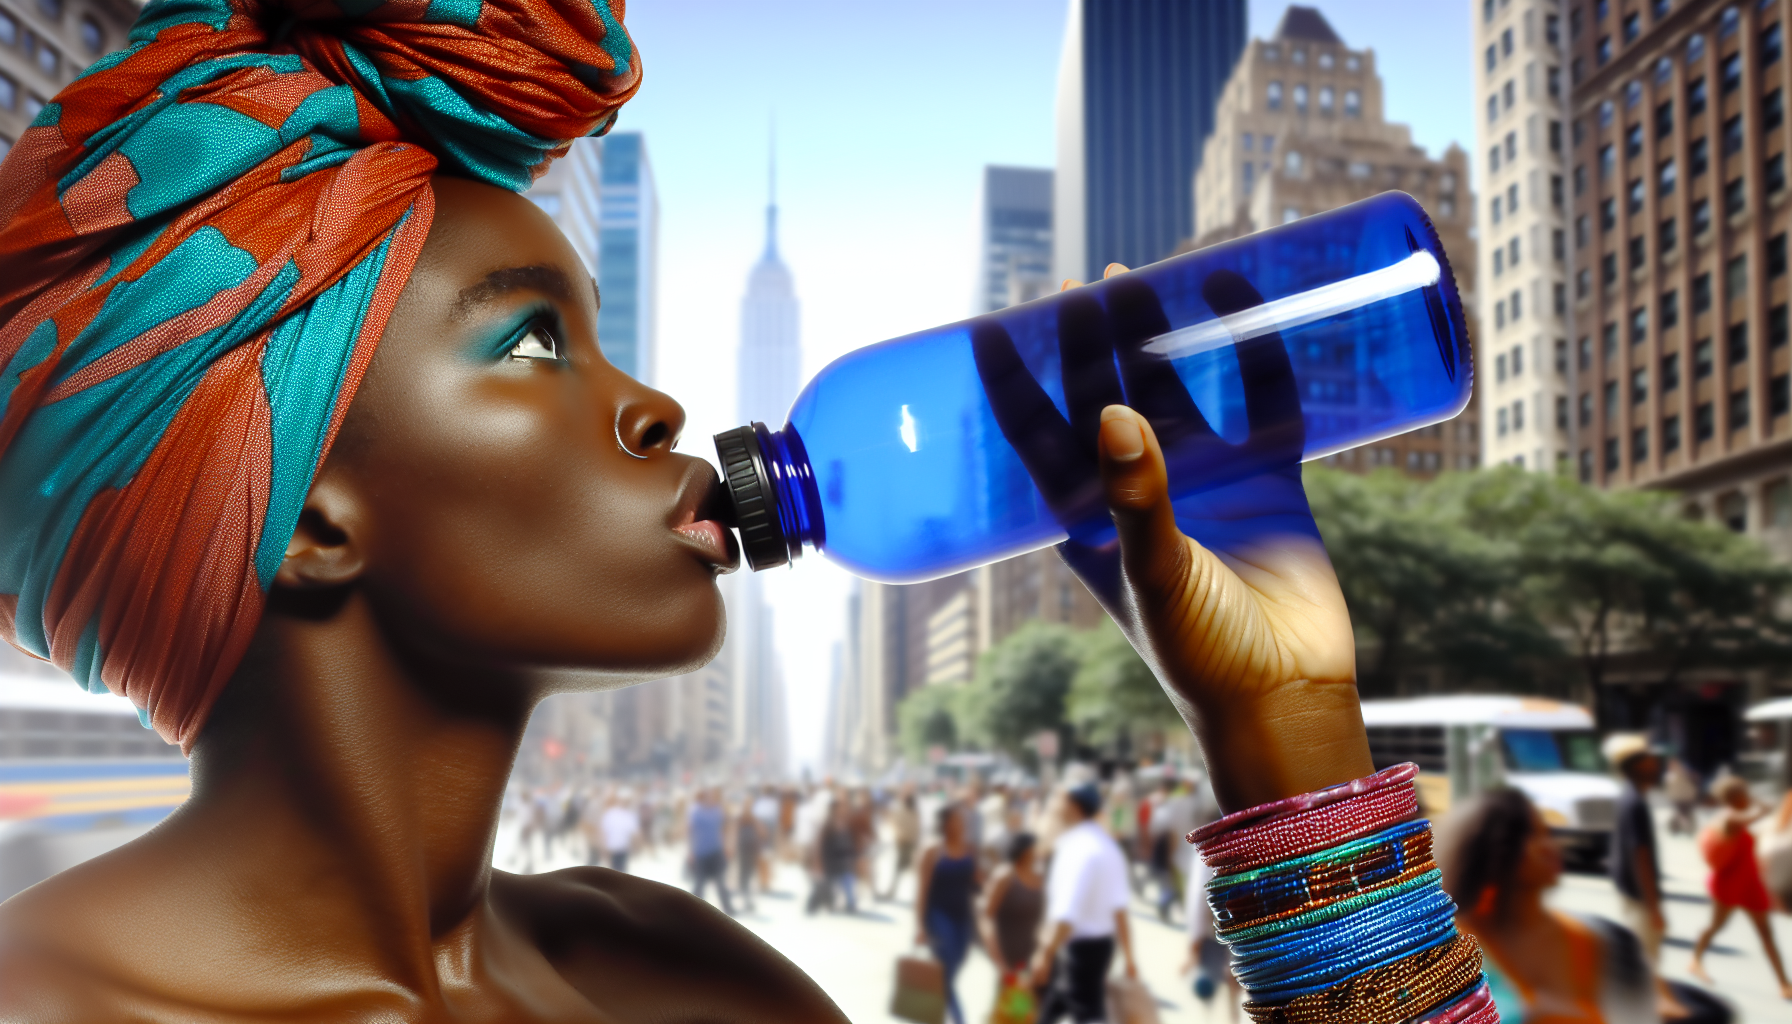 A picture of an Afircan American woman drinking from a blue water bottle in a city setting.